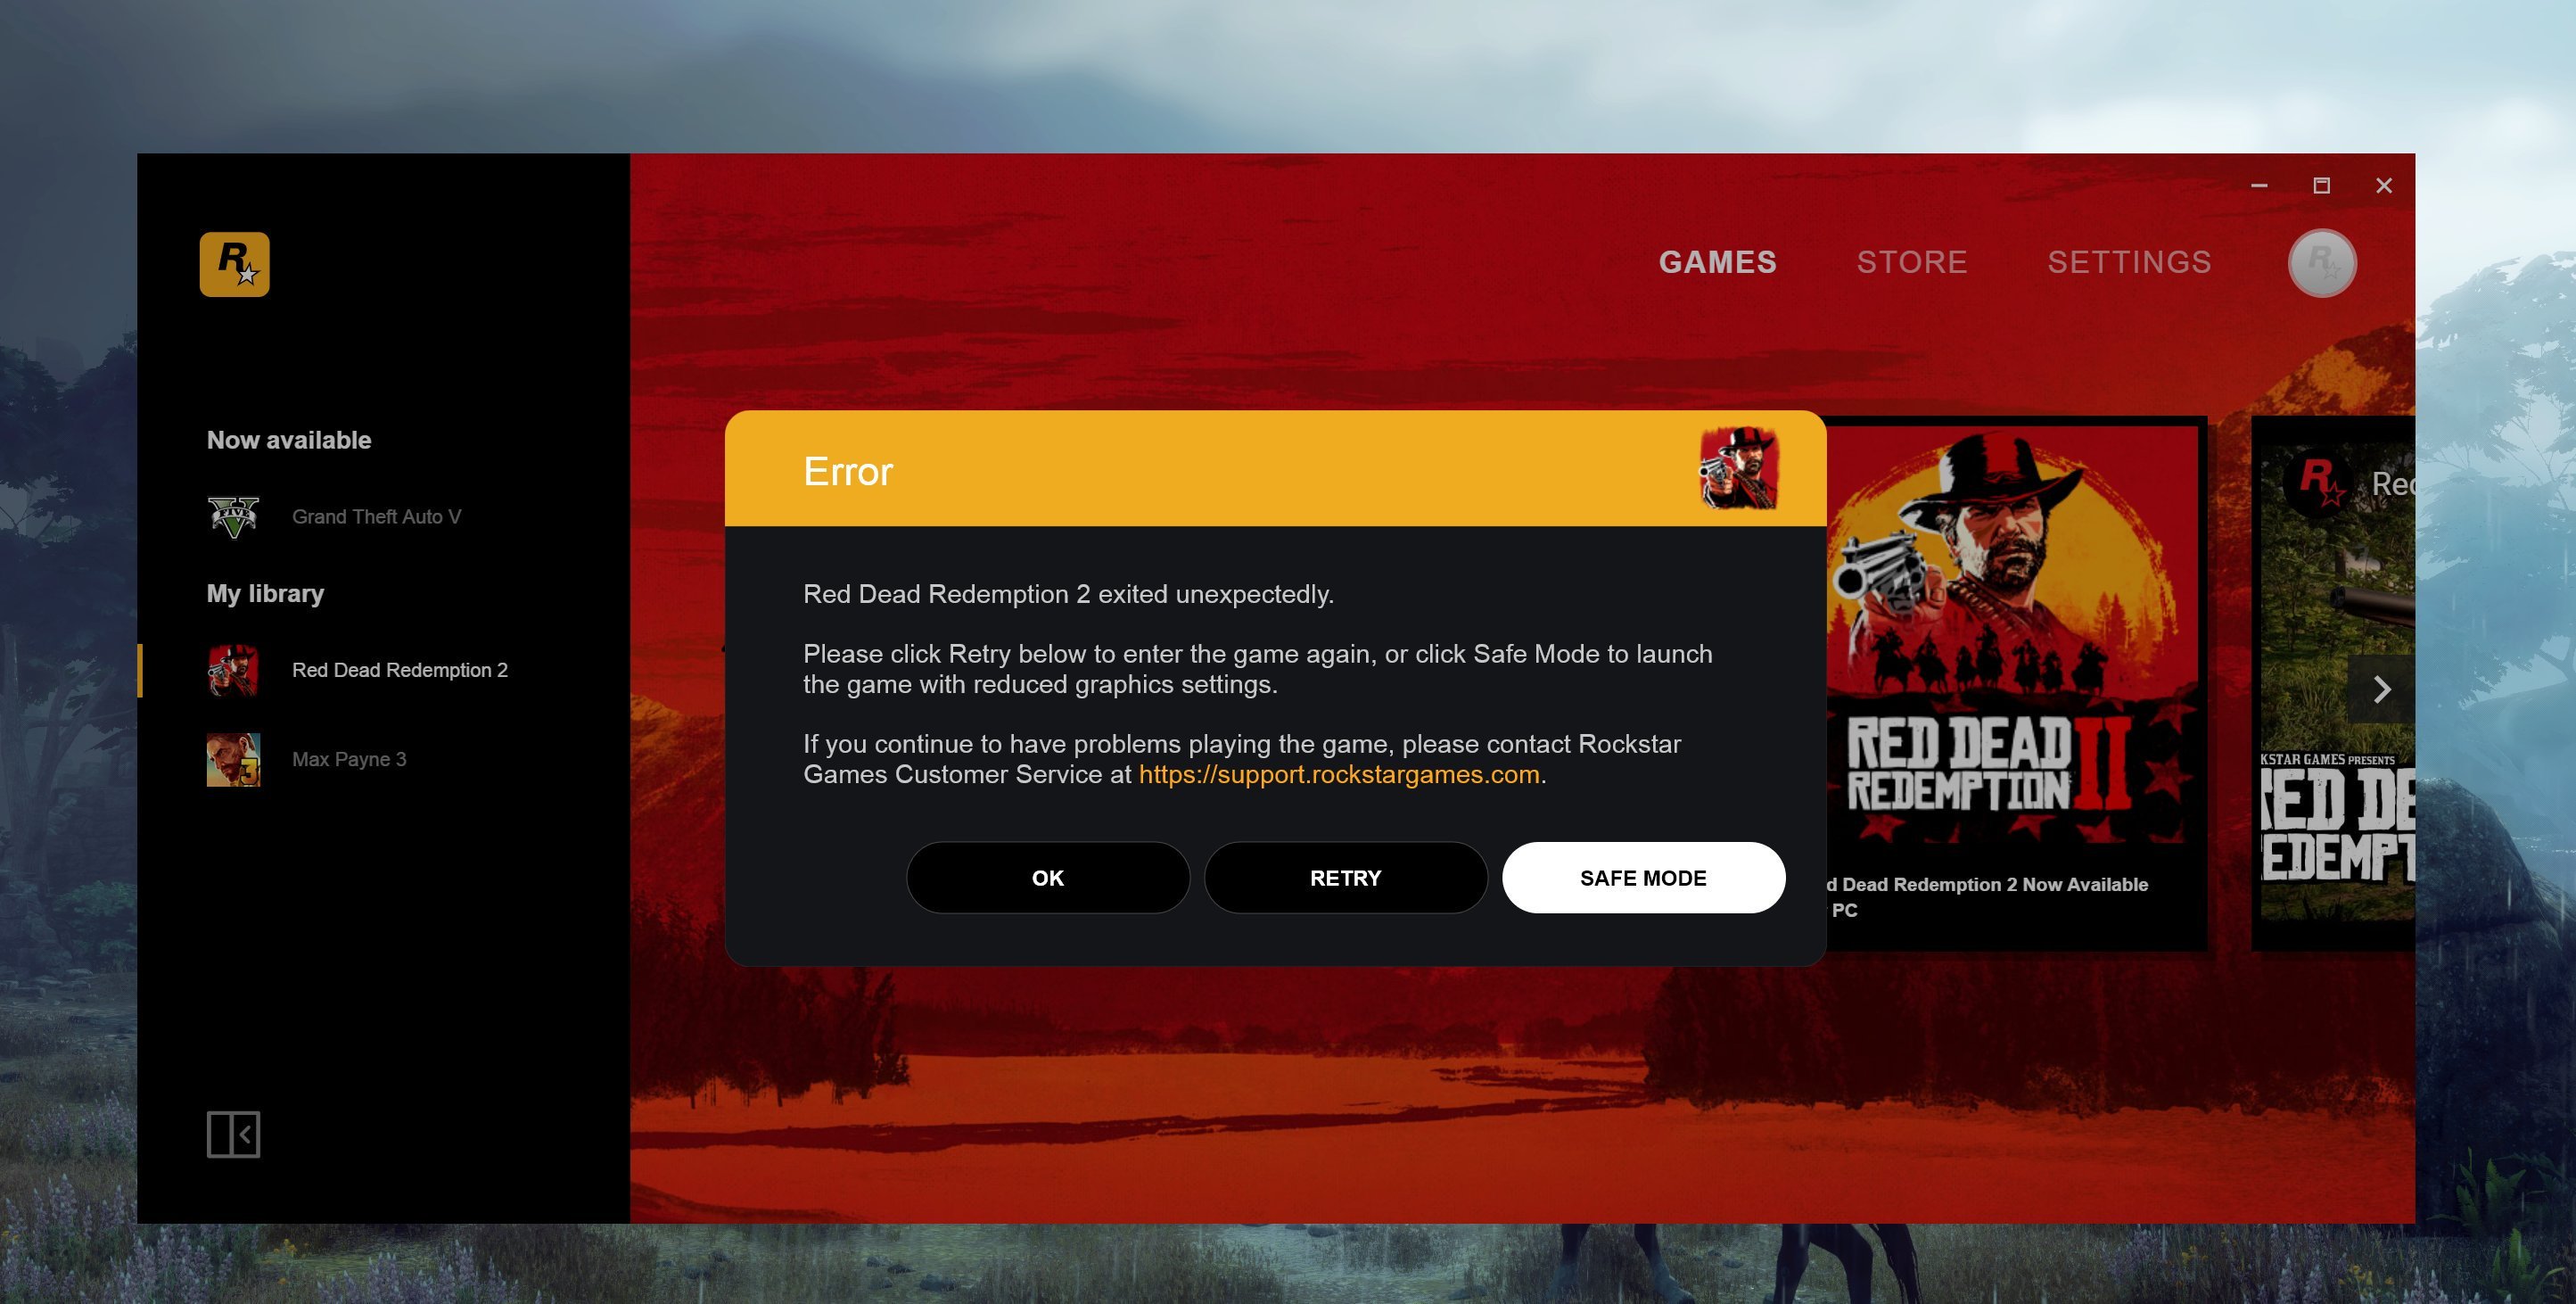 EXCLUSIVE: Rockstar Games Launcher update adds more mentions